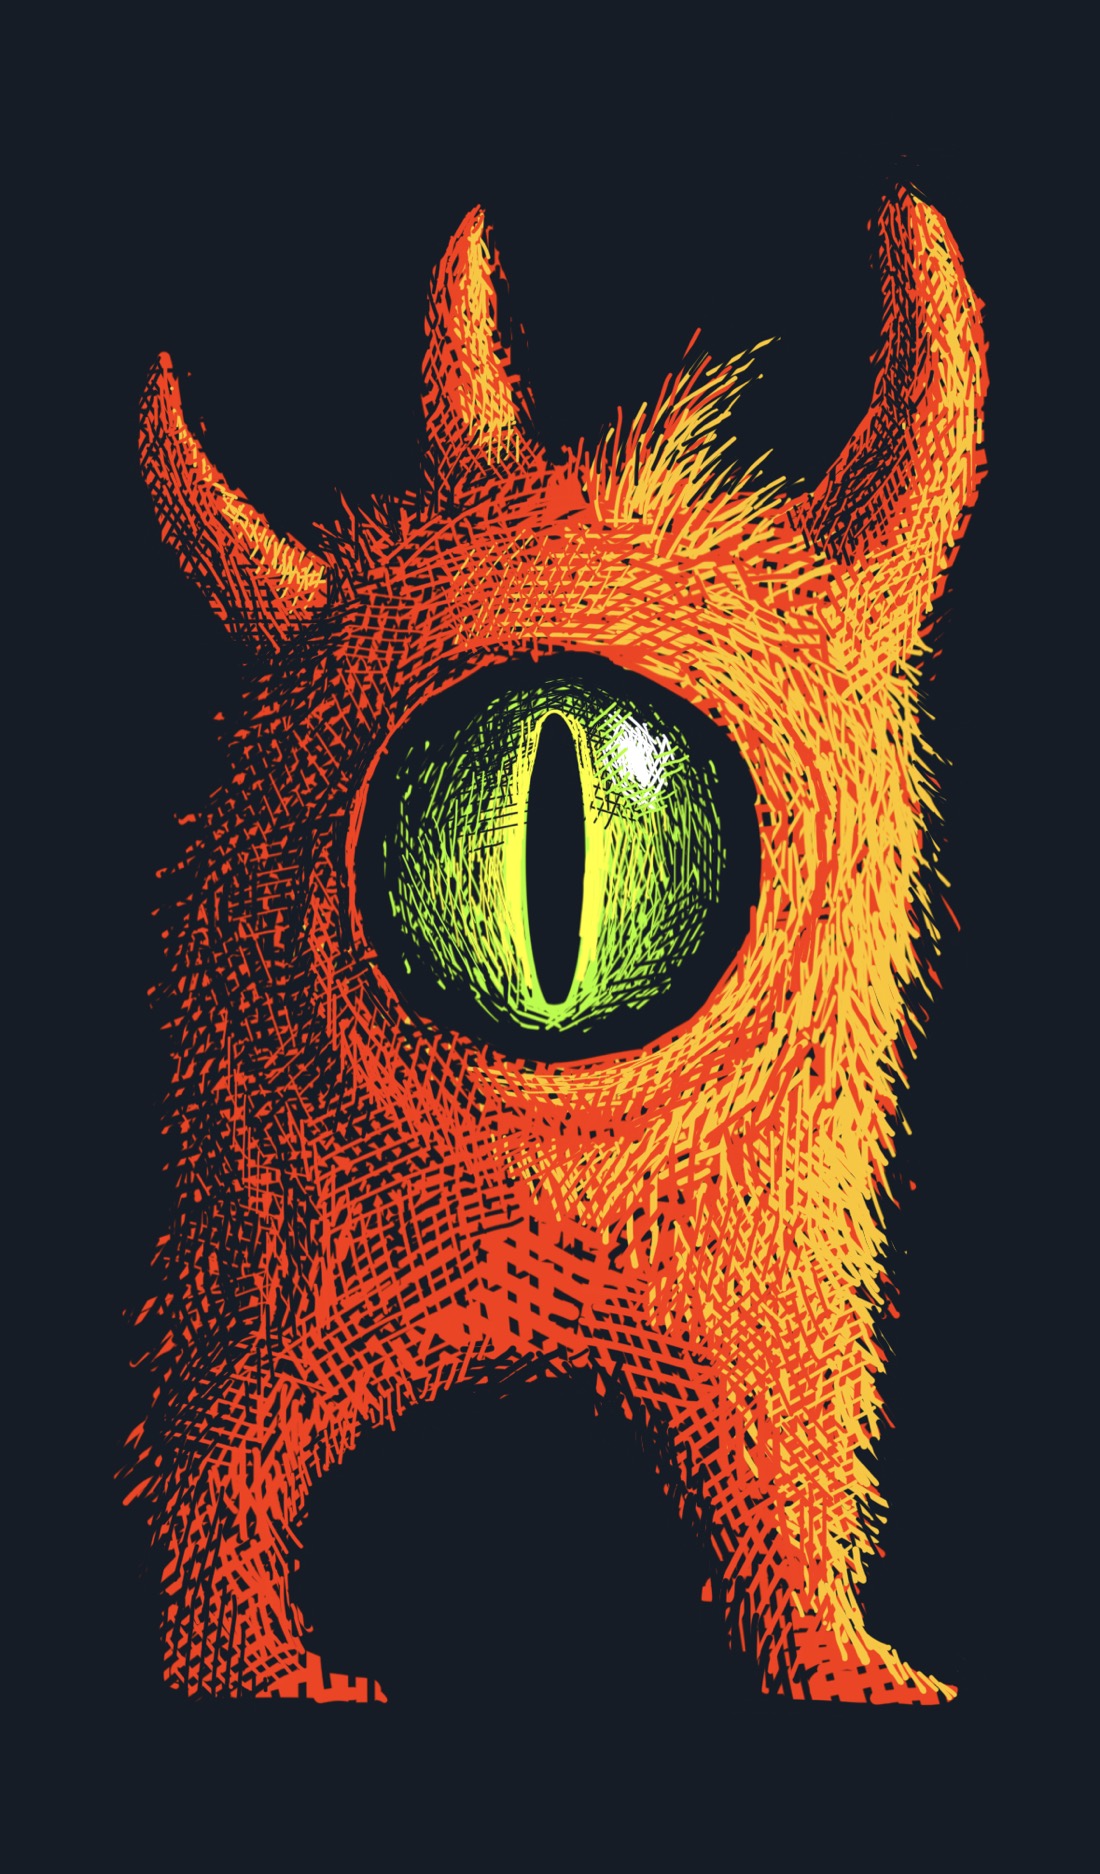 A furry, orange, two-legged creature with a tuft of hair, three horns, and one bright green eye with a narrow slit for an iris, like a snake's eye.